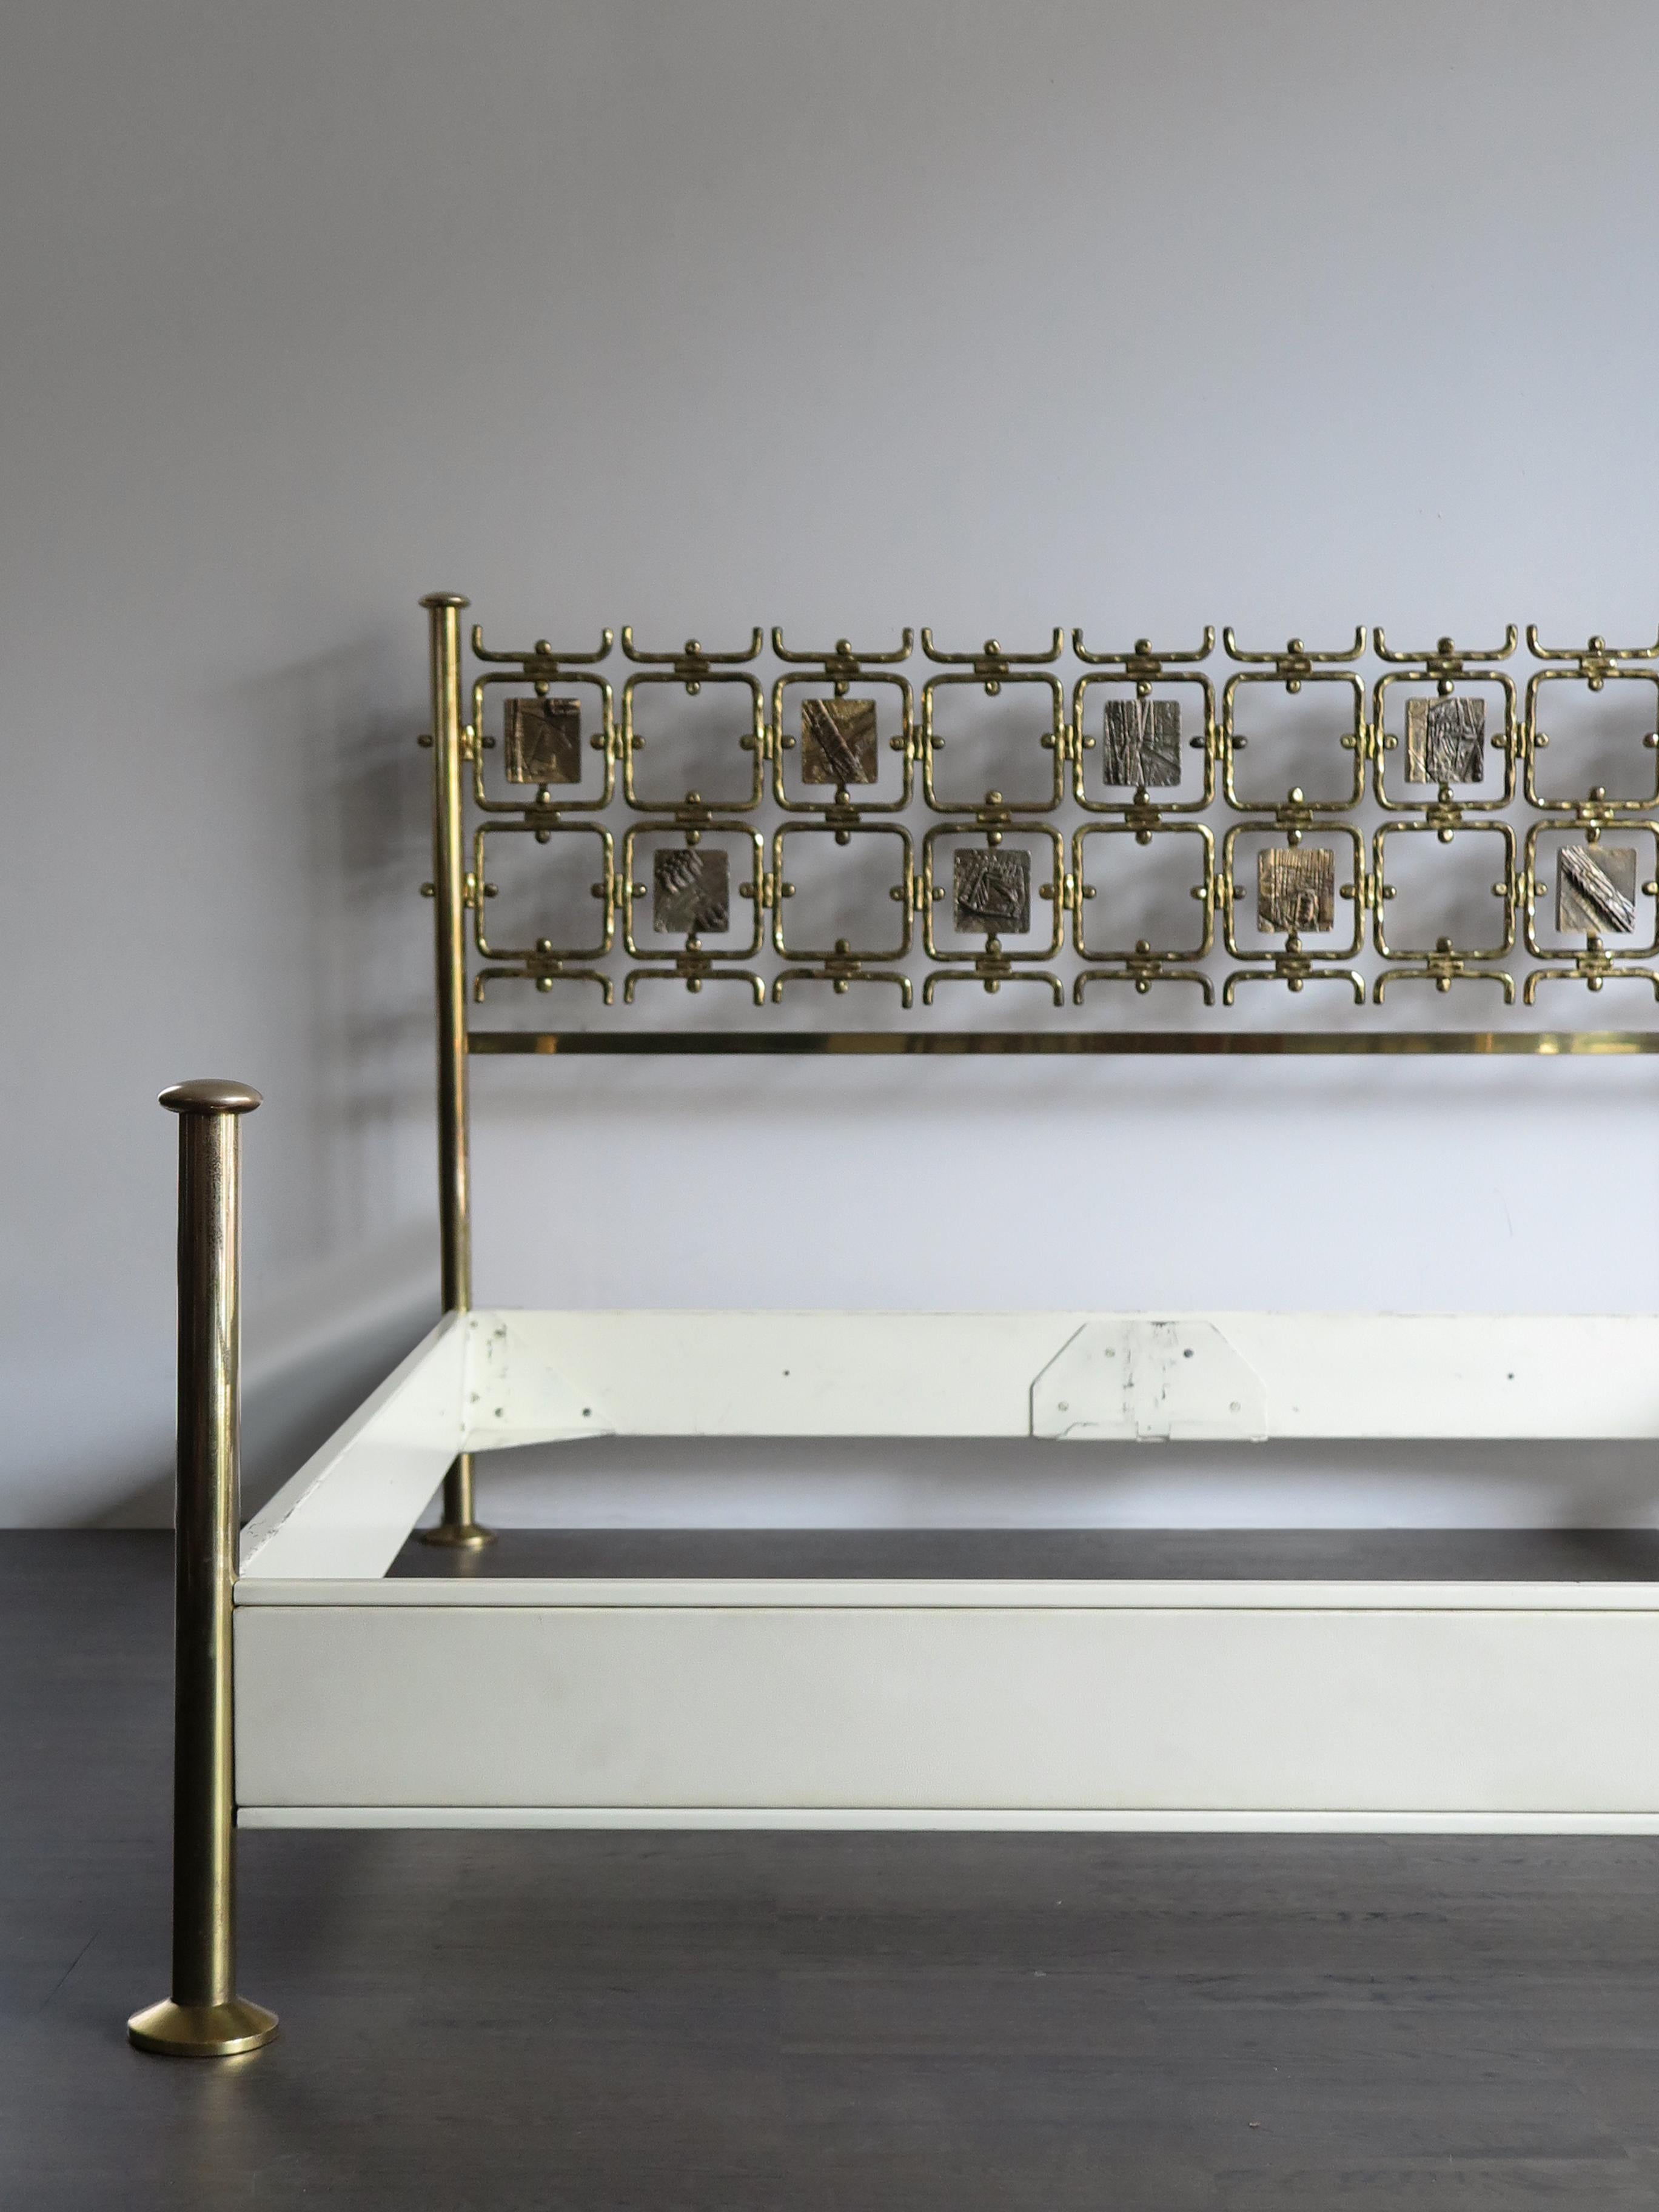 Famous, rare and amazing bed Model 8604 designed by Osvaldo Borsani in collaboration with the sculptor artist Arnaldo Pomodoro author of the sculpture headboard composed of frames of modular elements in brass with embedded engraved panels,
Tecno